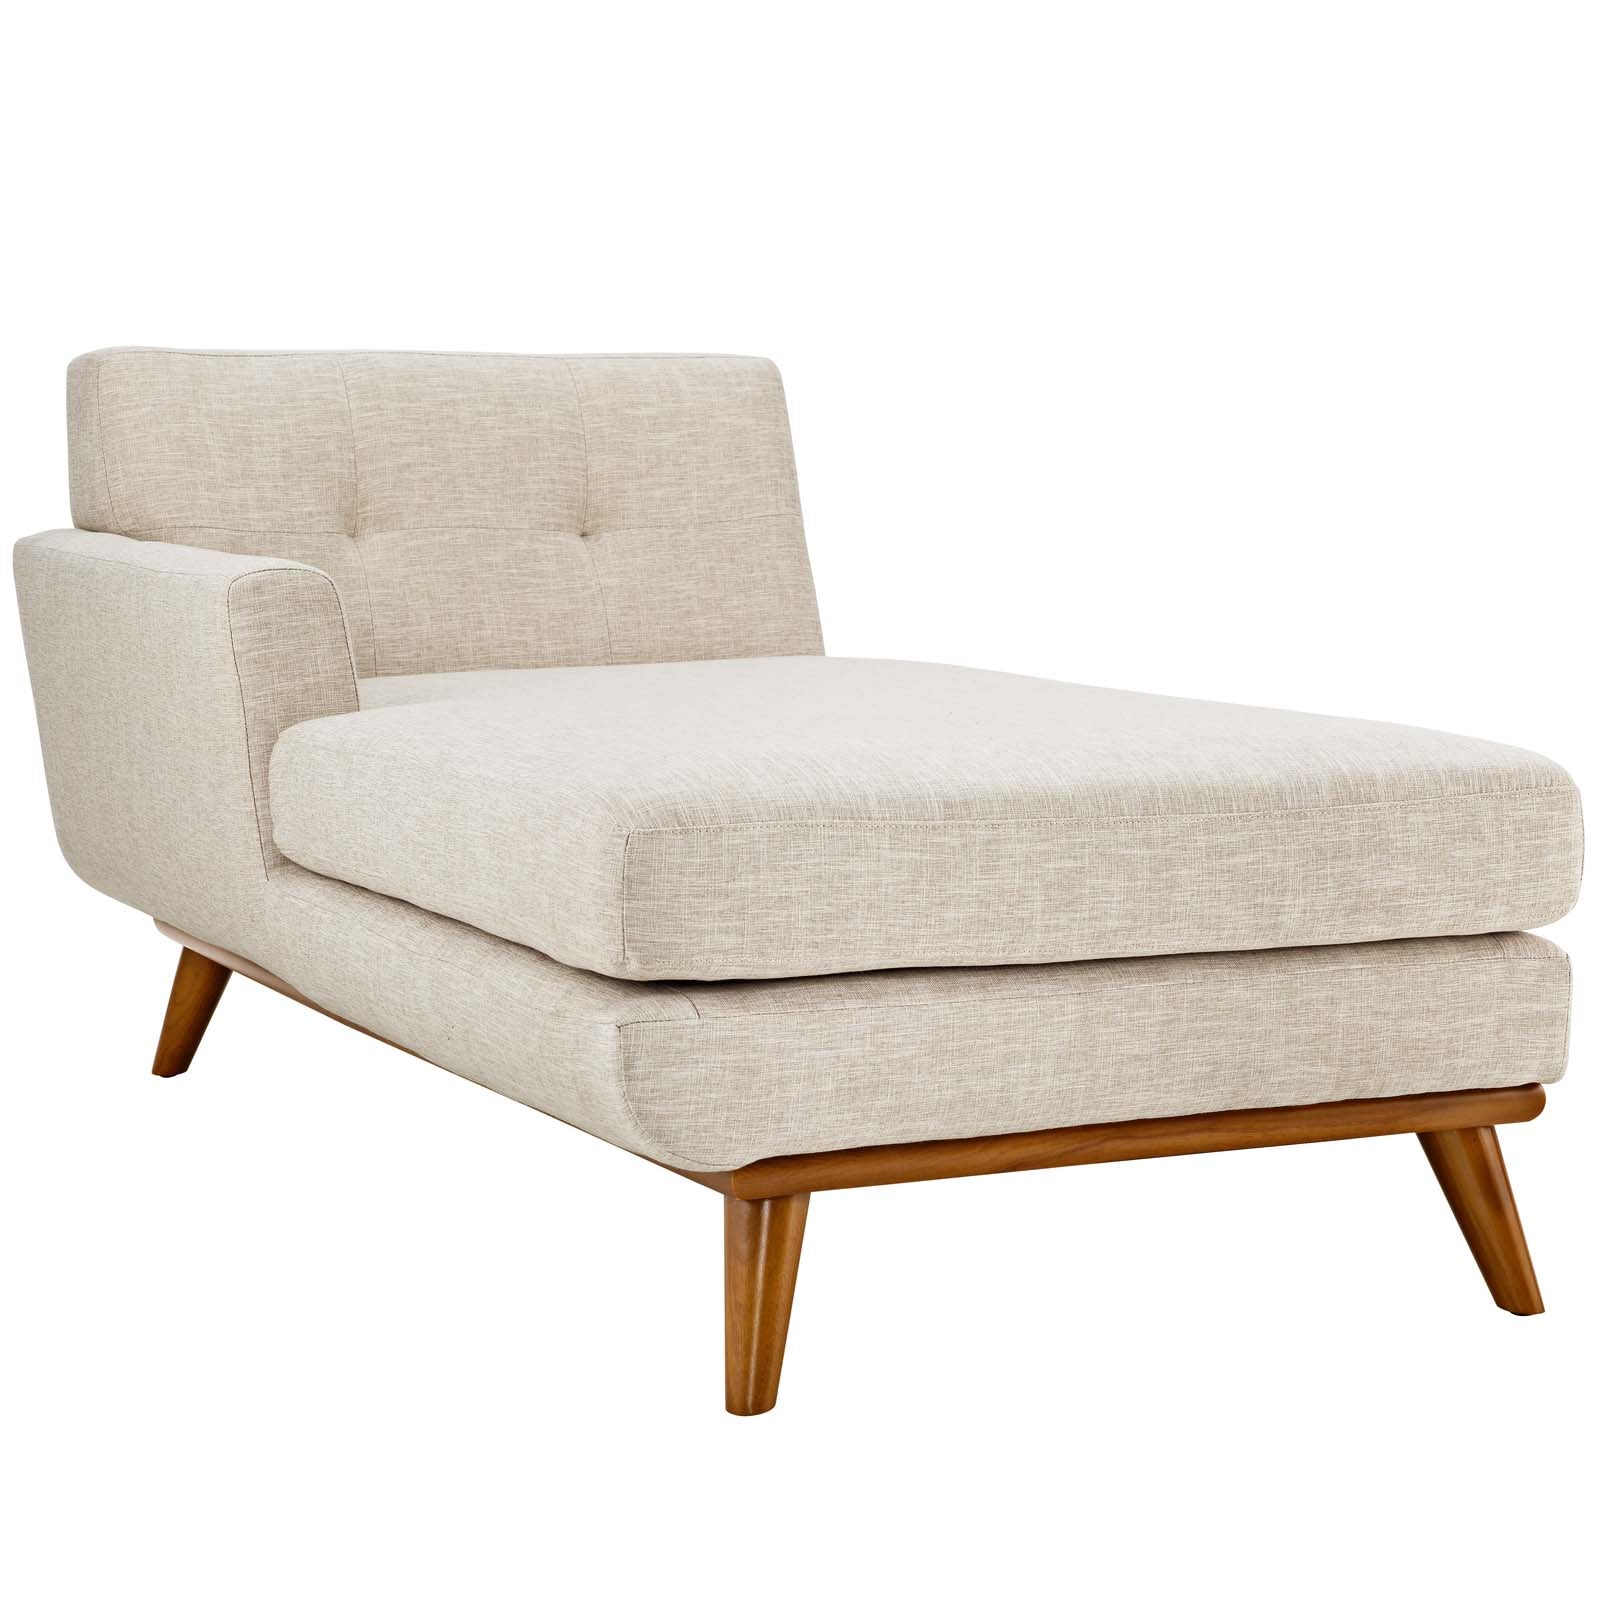 Modway Sleepers & Futons - Engage Left-Facing Upholstered Fabric Chaise Beige